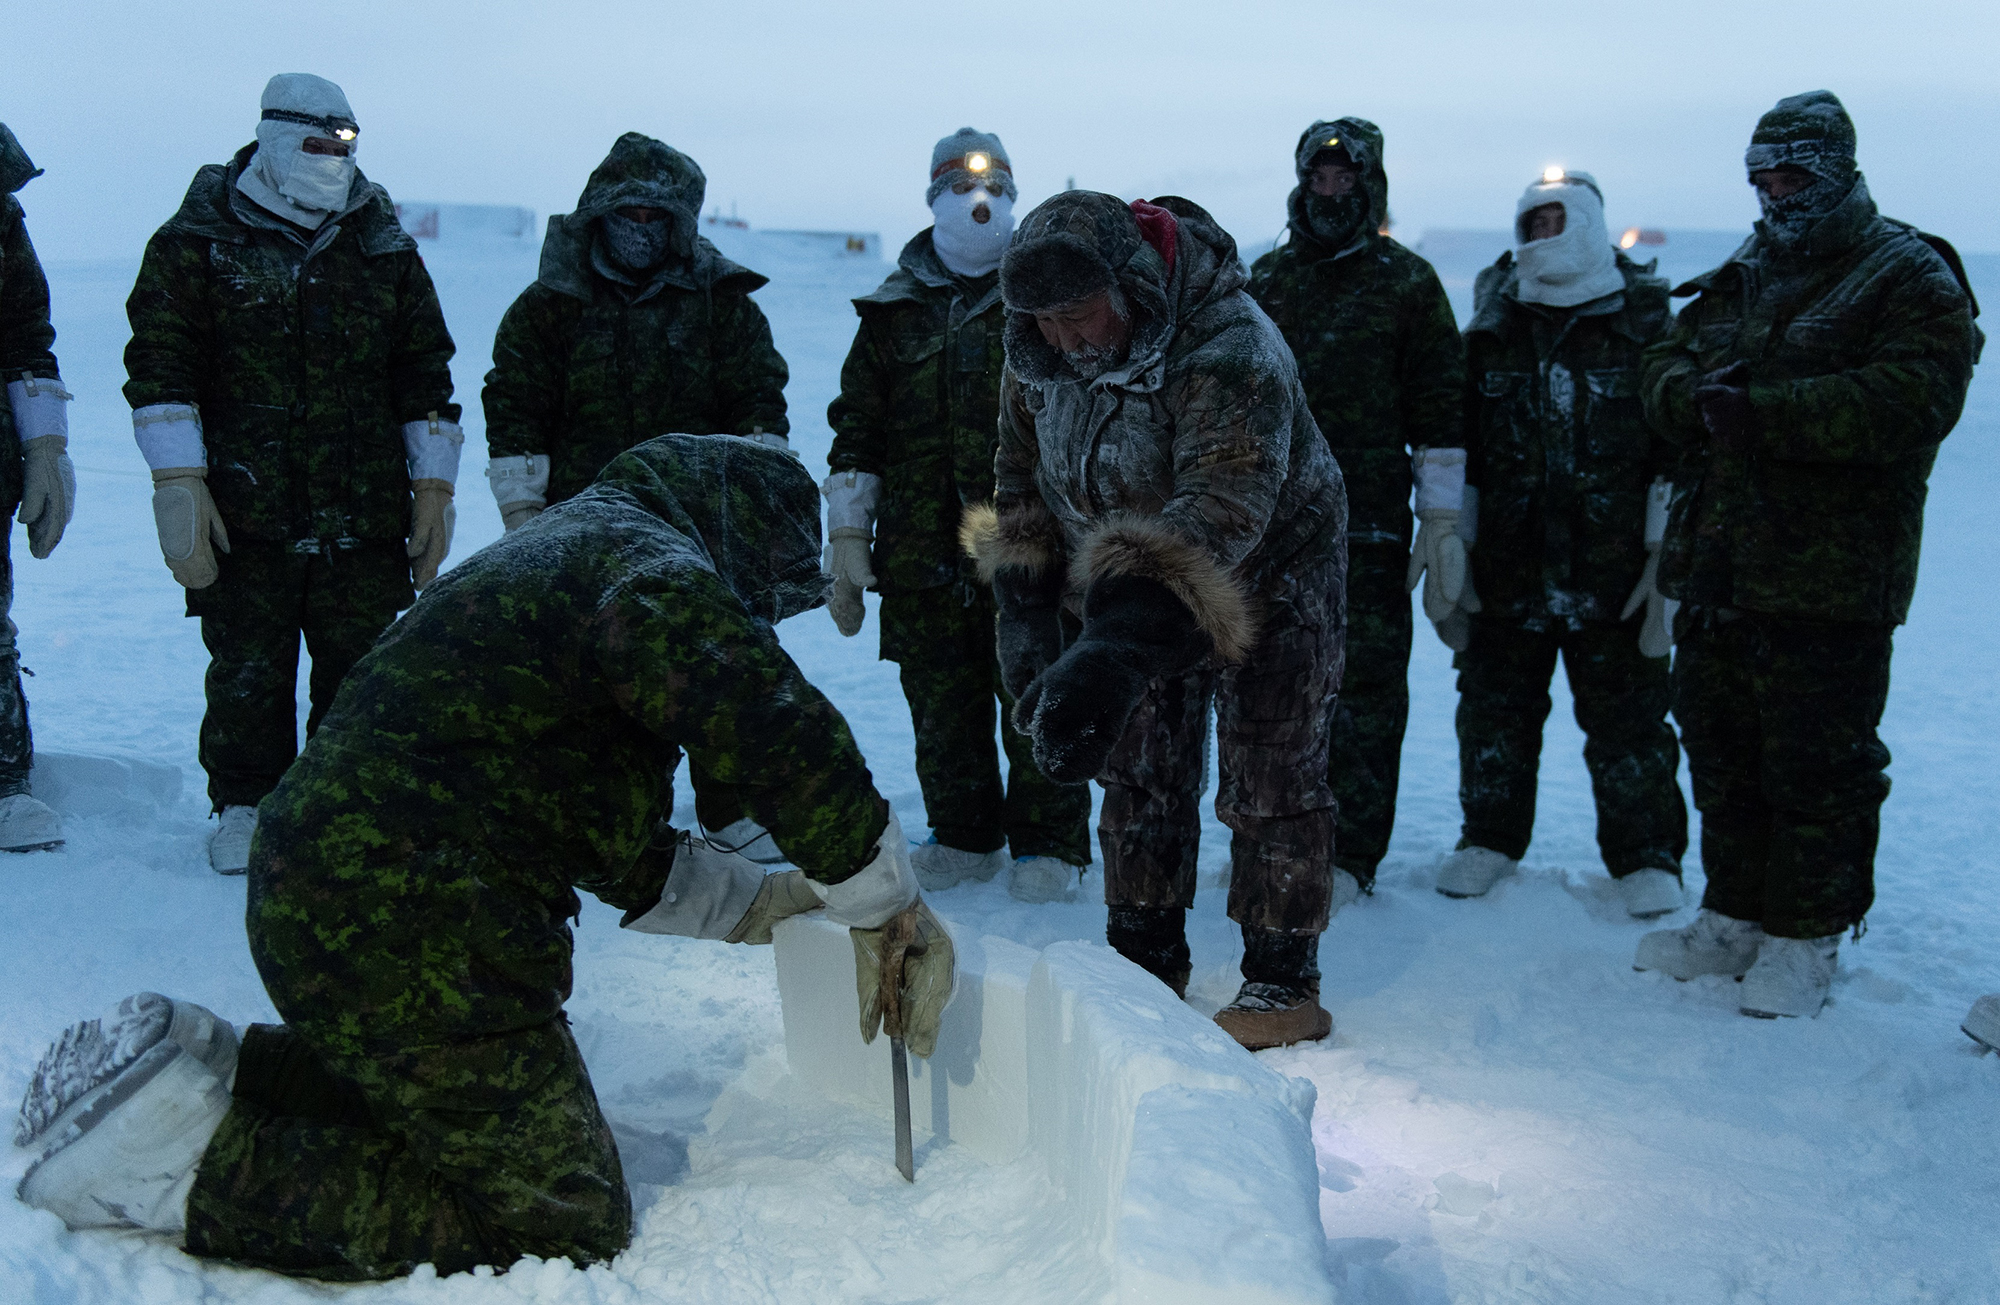 Corporal Solomon Awa, a Ranger with 1 Canadian Ranger Patrol Group, from Iqaluit, instructs igloo building, during the Air Ops Survival – Arctic Aircrew Course held in Resolute Bay, Nunavut, from January 21 to February 1, 2020. PHOTO: Corporal Brian Lindgren